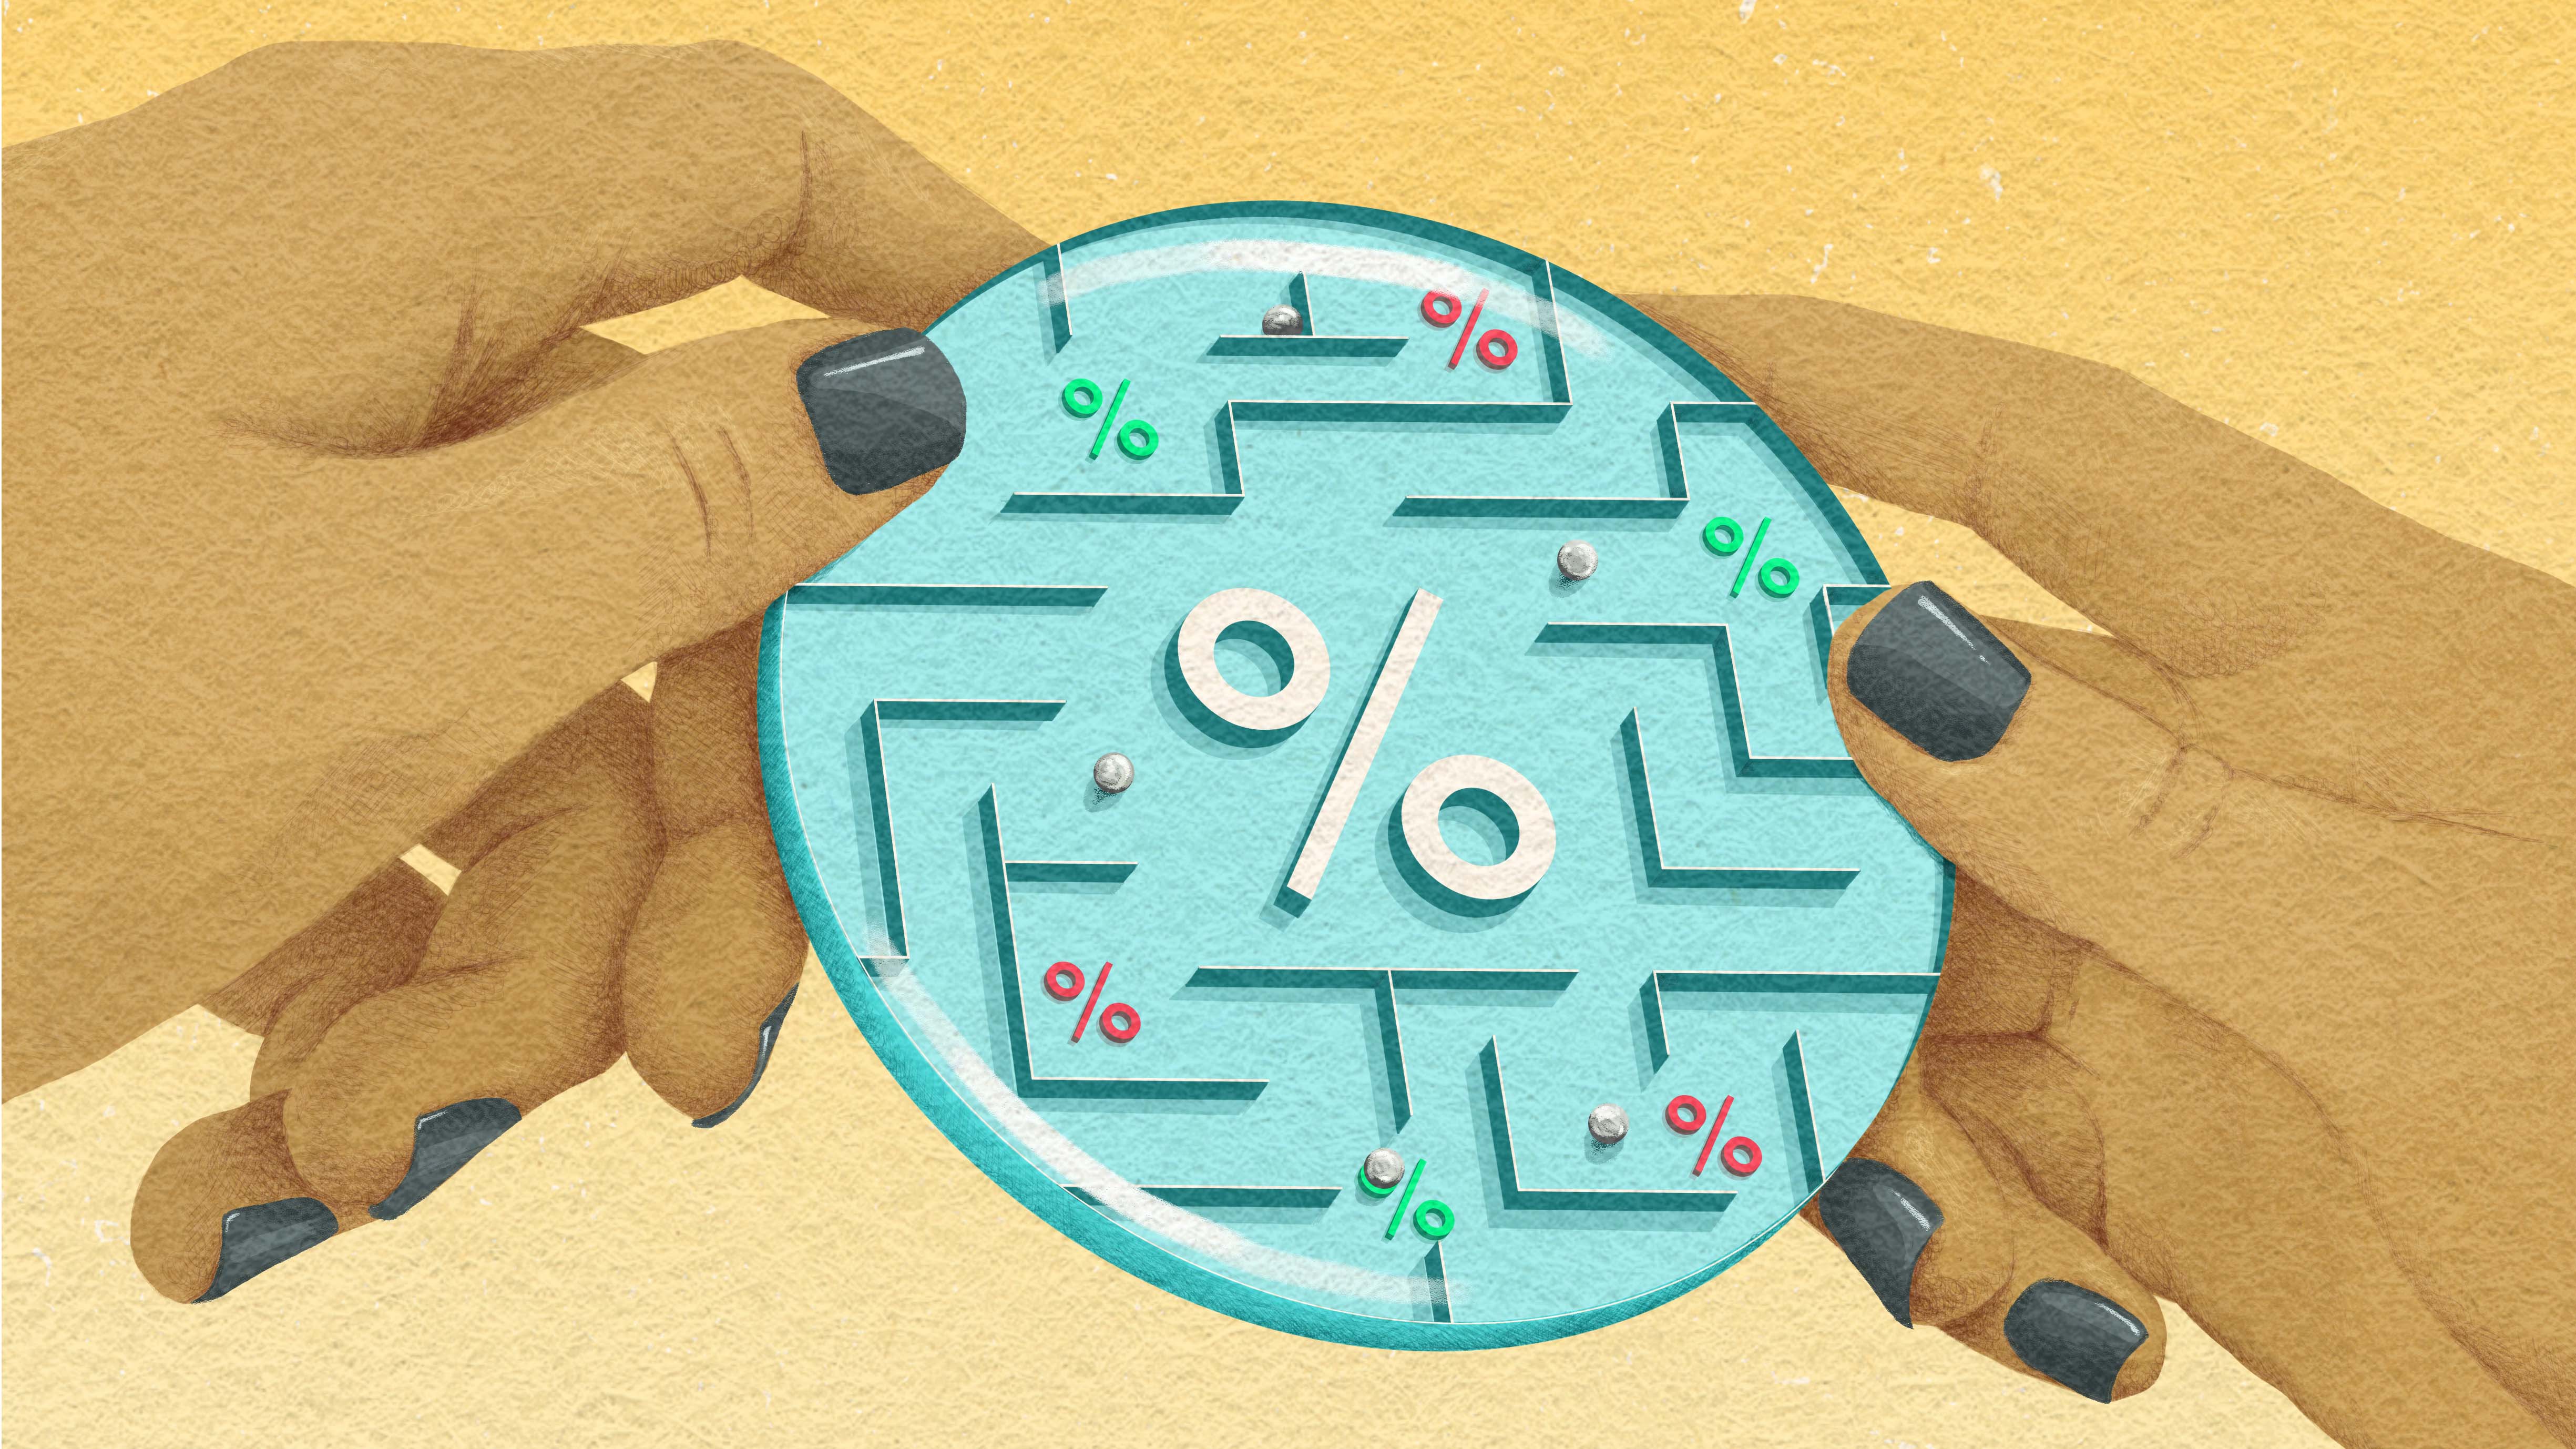 Illustration of a person playing a tax-themed handheld marble maze game.